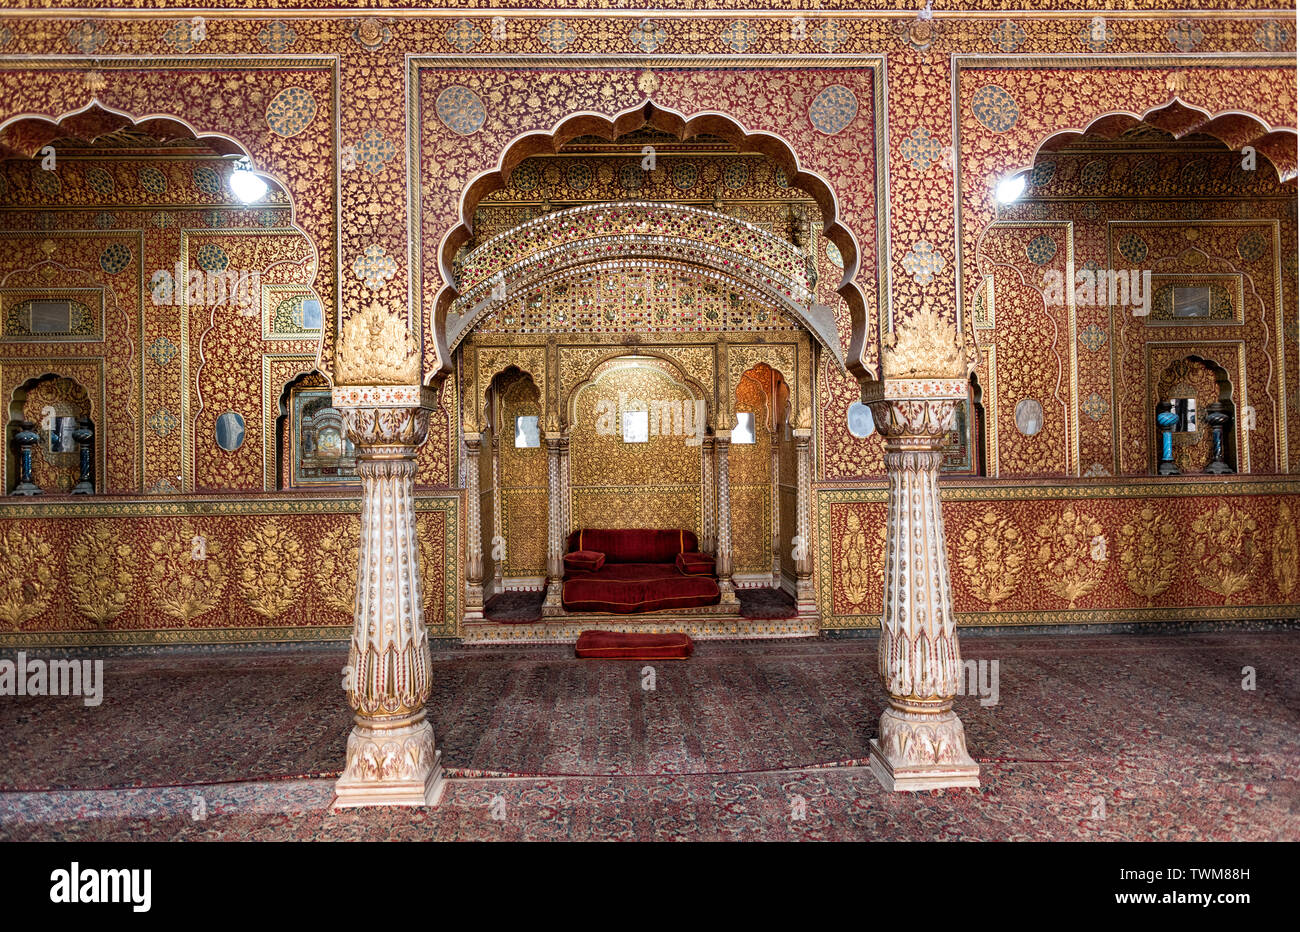 A close up of Anup Mahal of Junagarh Fort,Bikaner,Rajasthan,India which was actually a private audience hall.The intricate gold work is amazing. Stock Photo